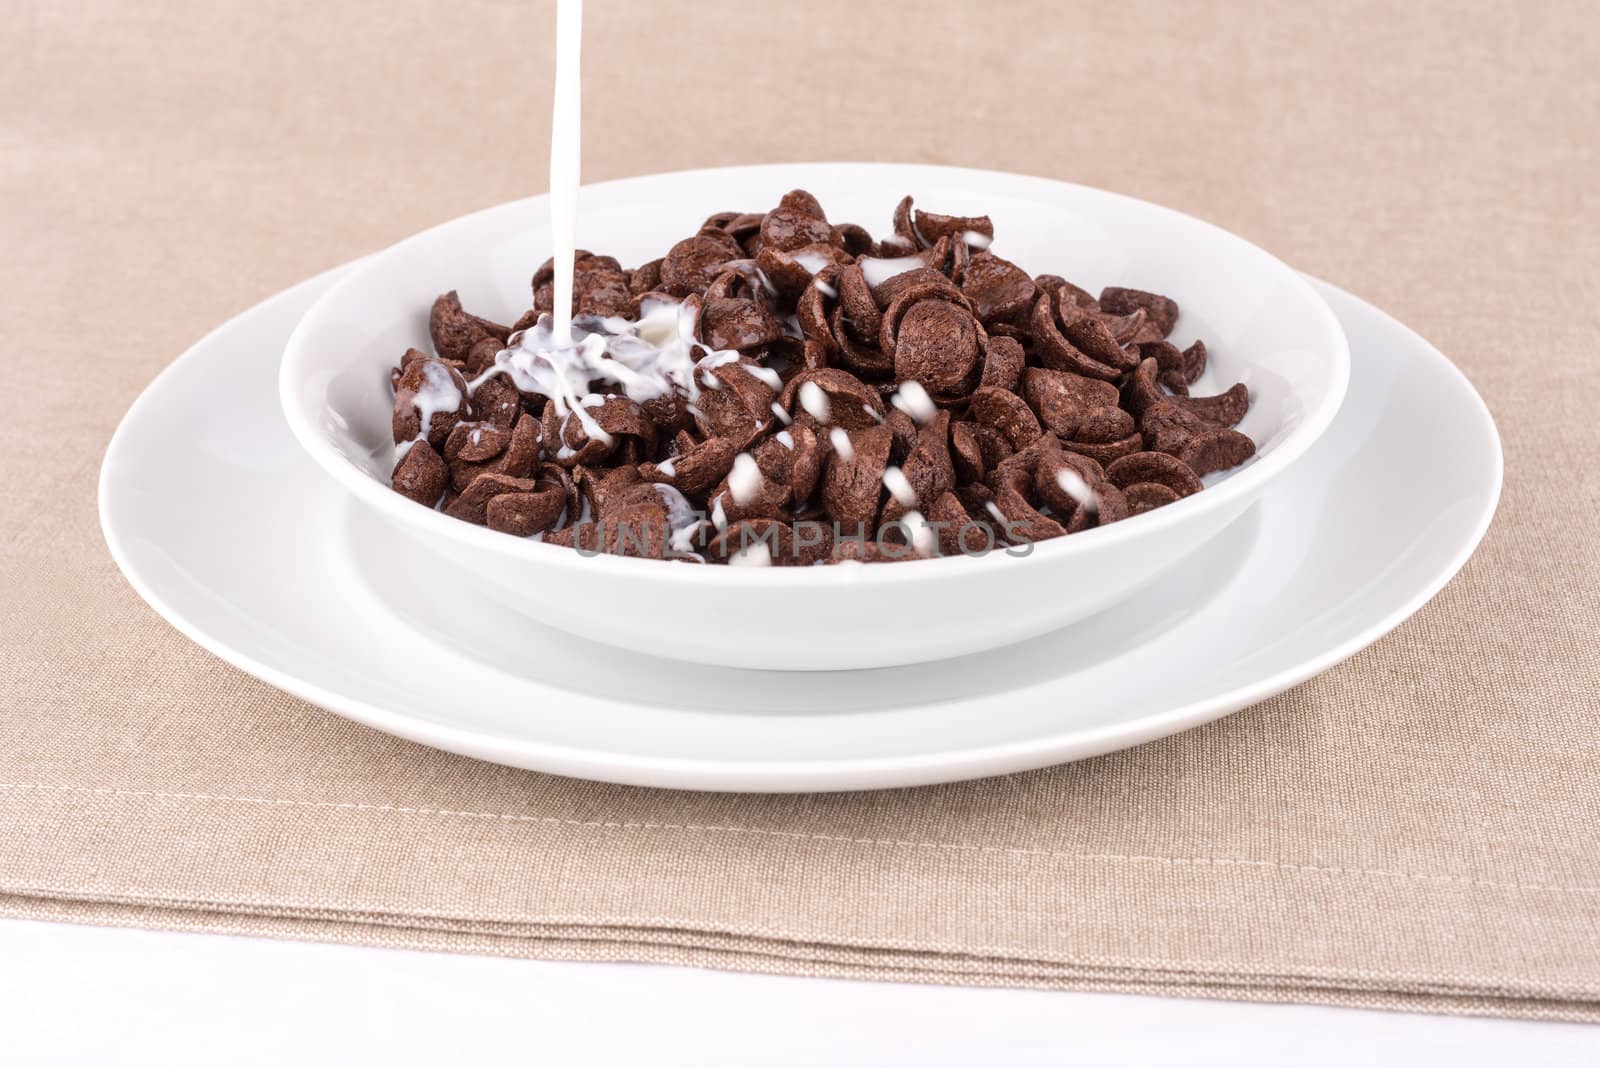 Milk pouring into a dish with chocolate cereal flakes.